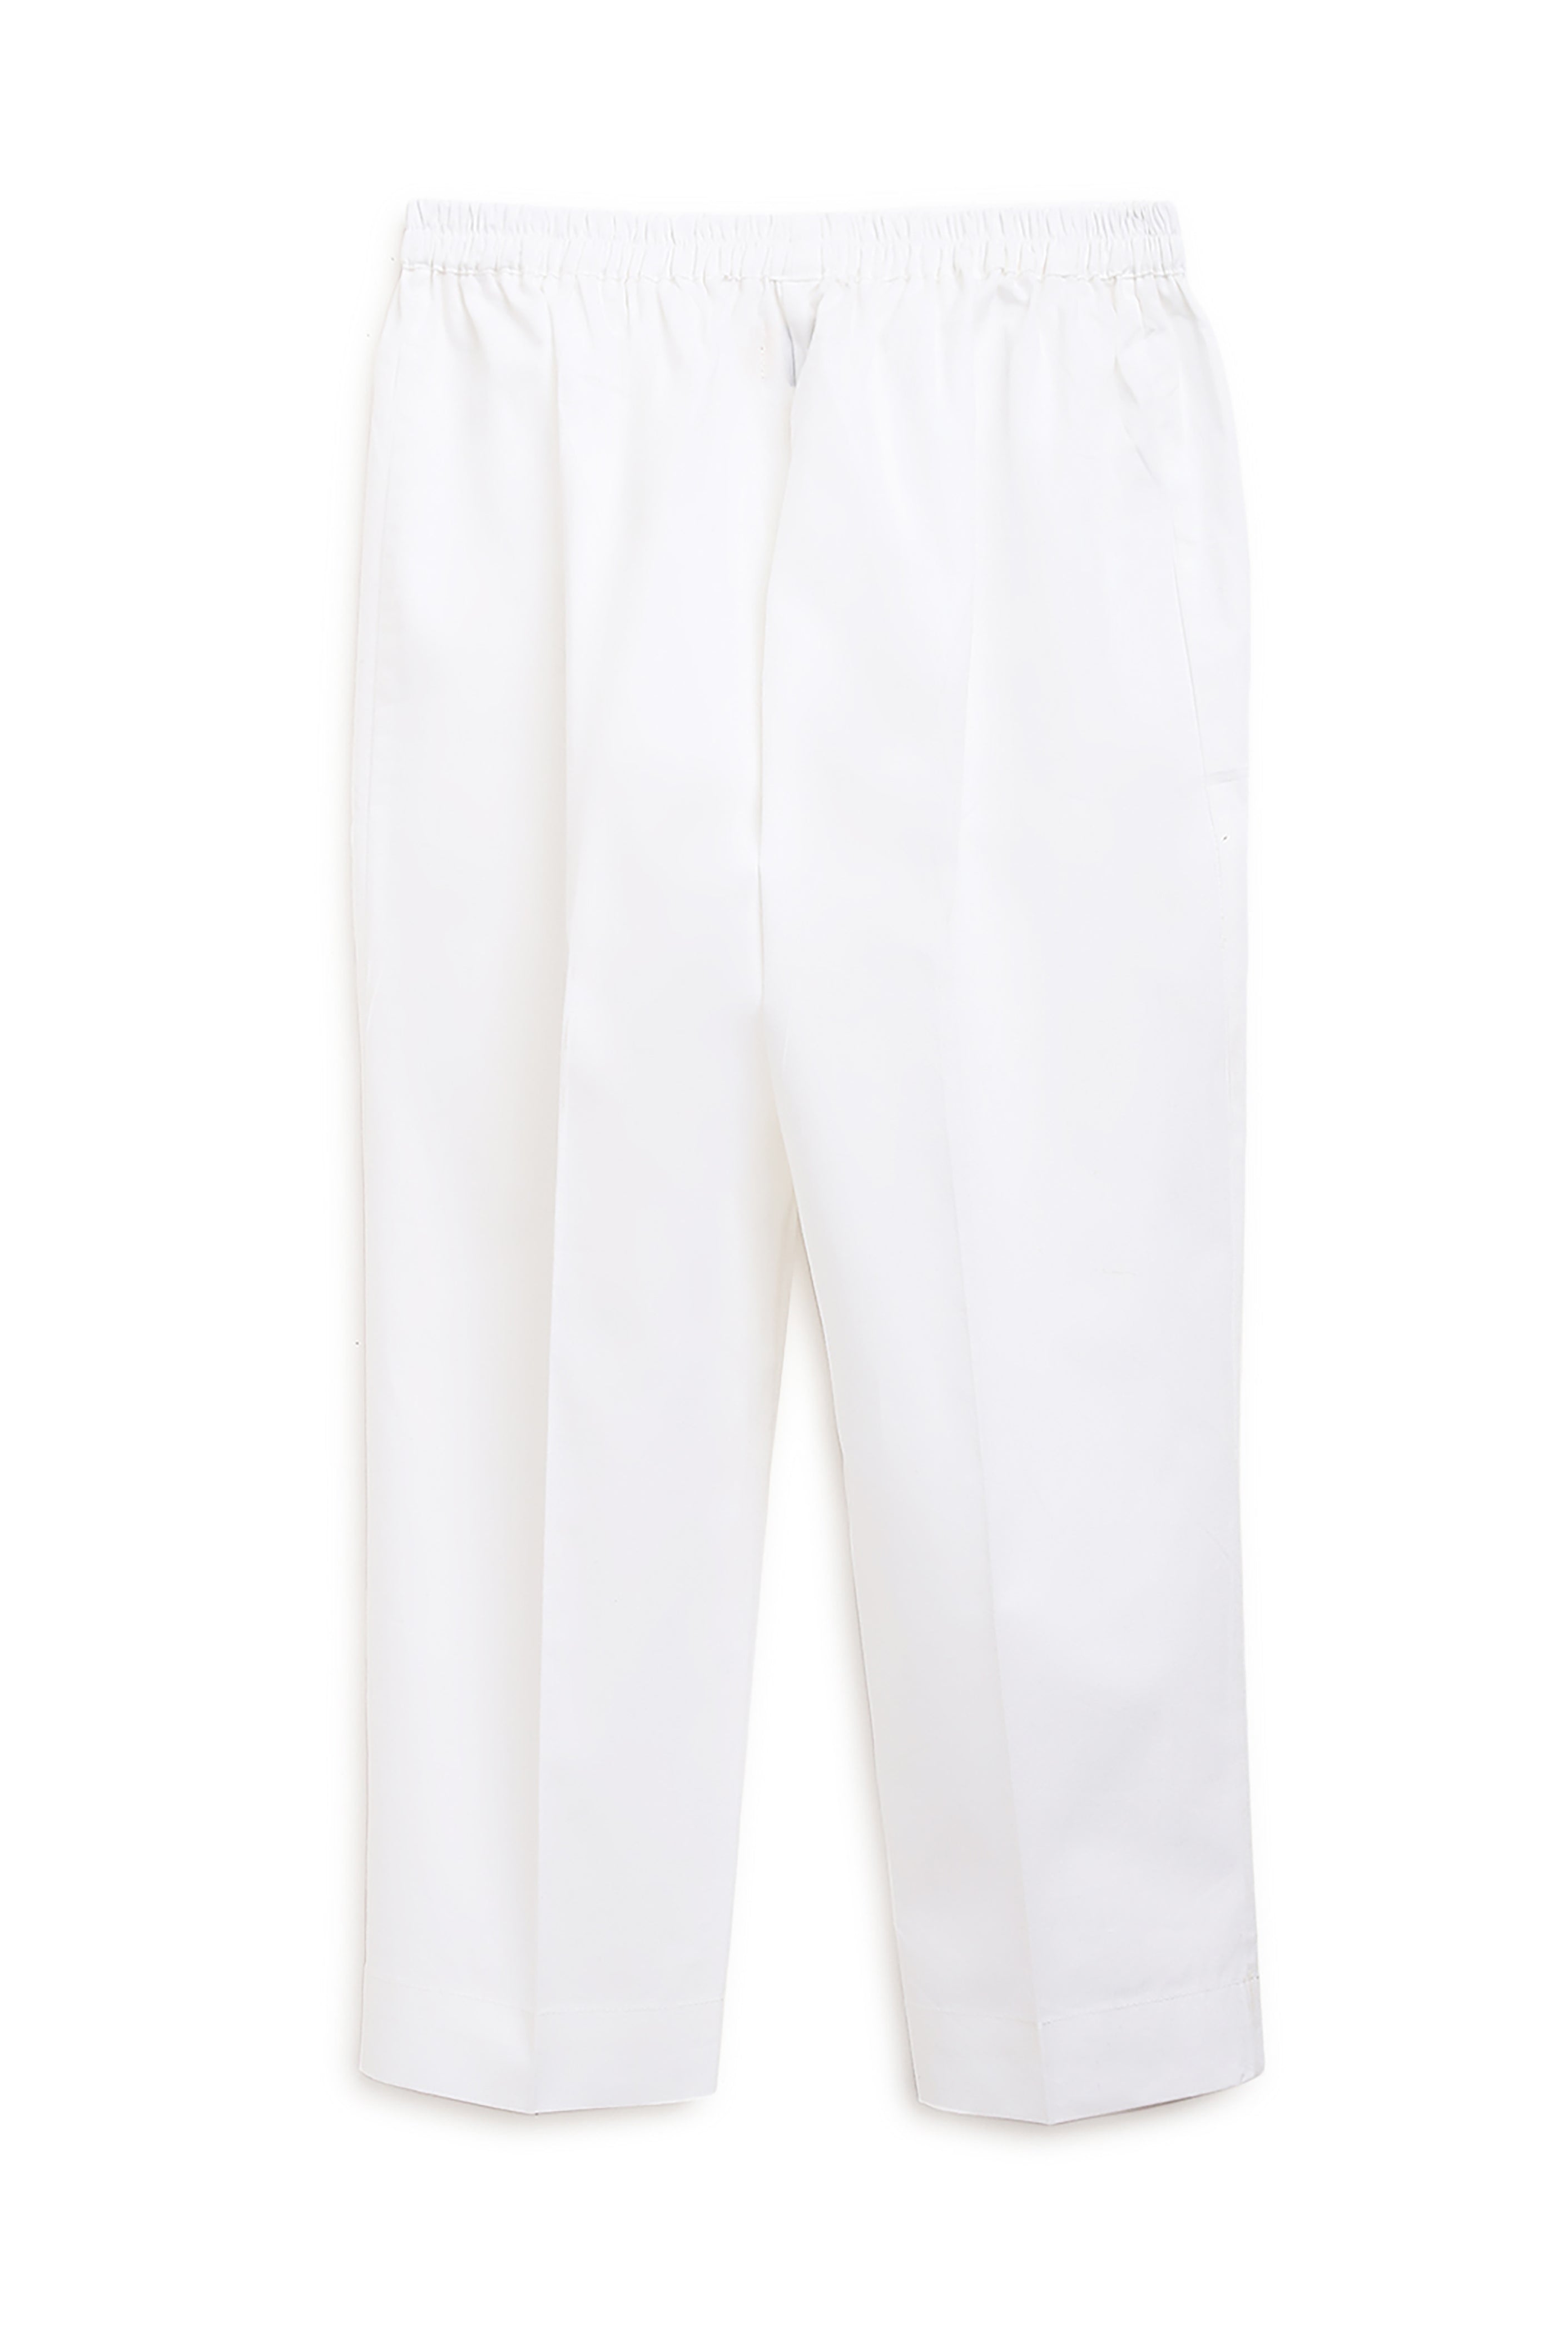 Discover more than 303 buy cotton trousers best